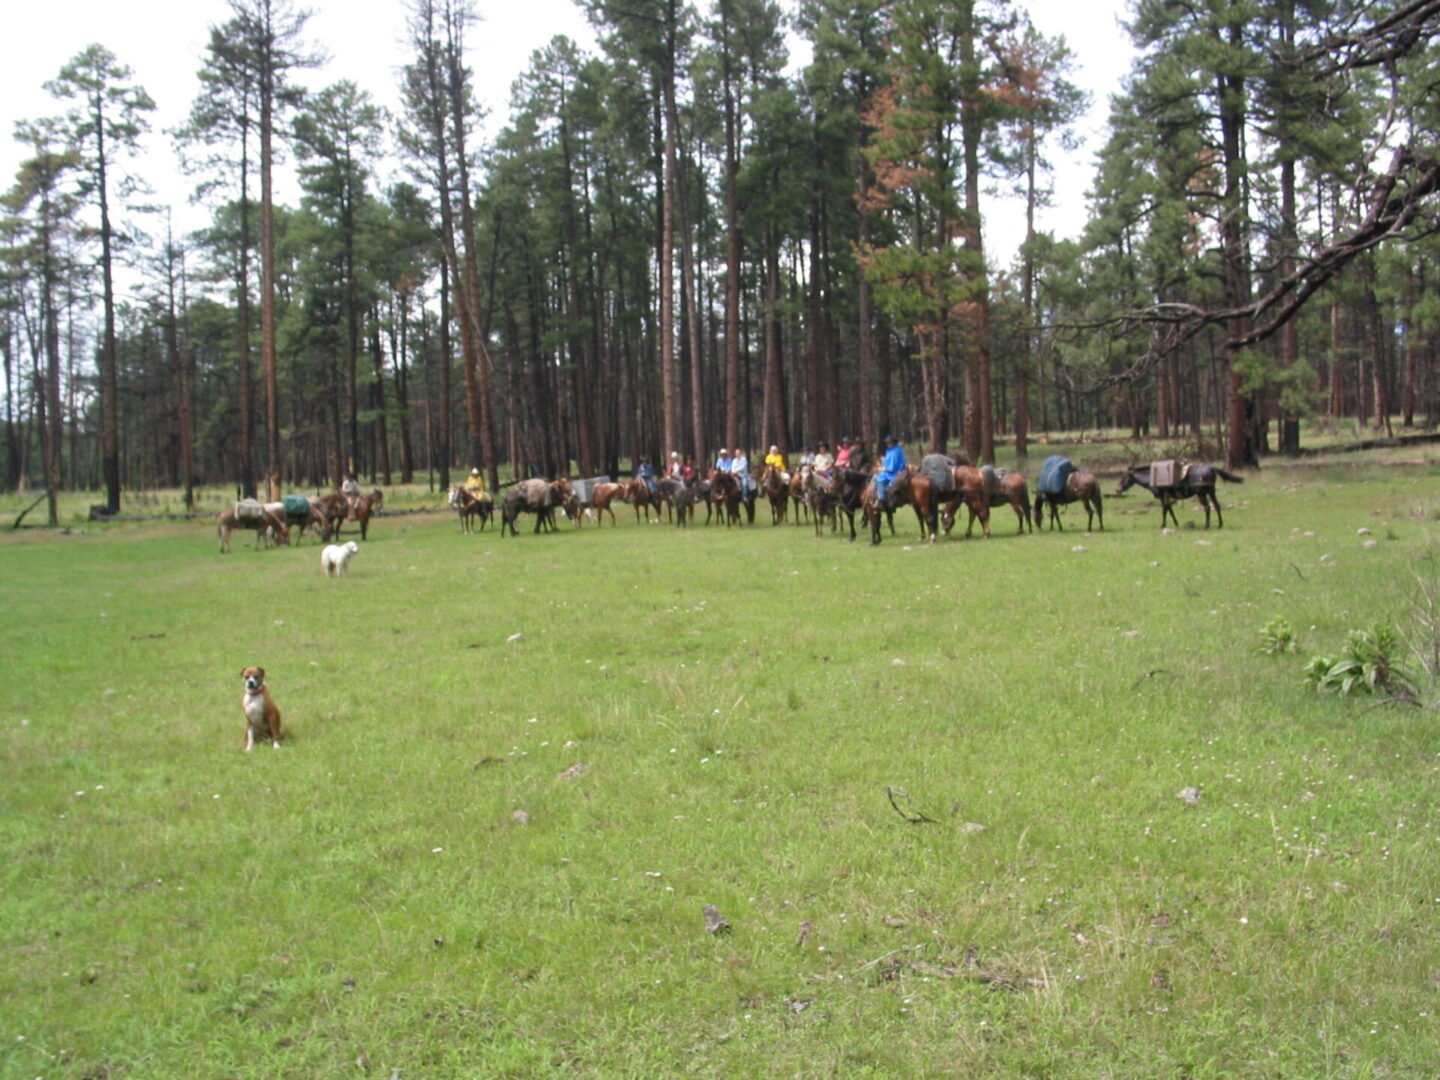 A group of people on horses in the grass.